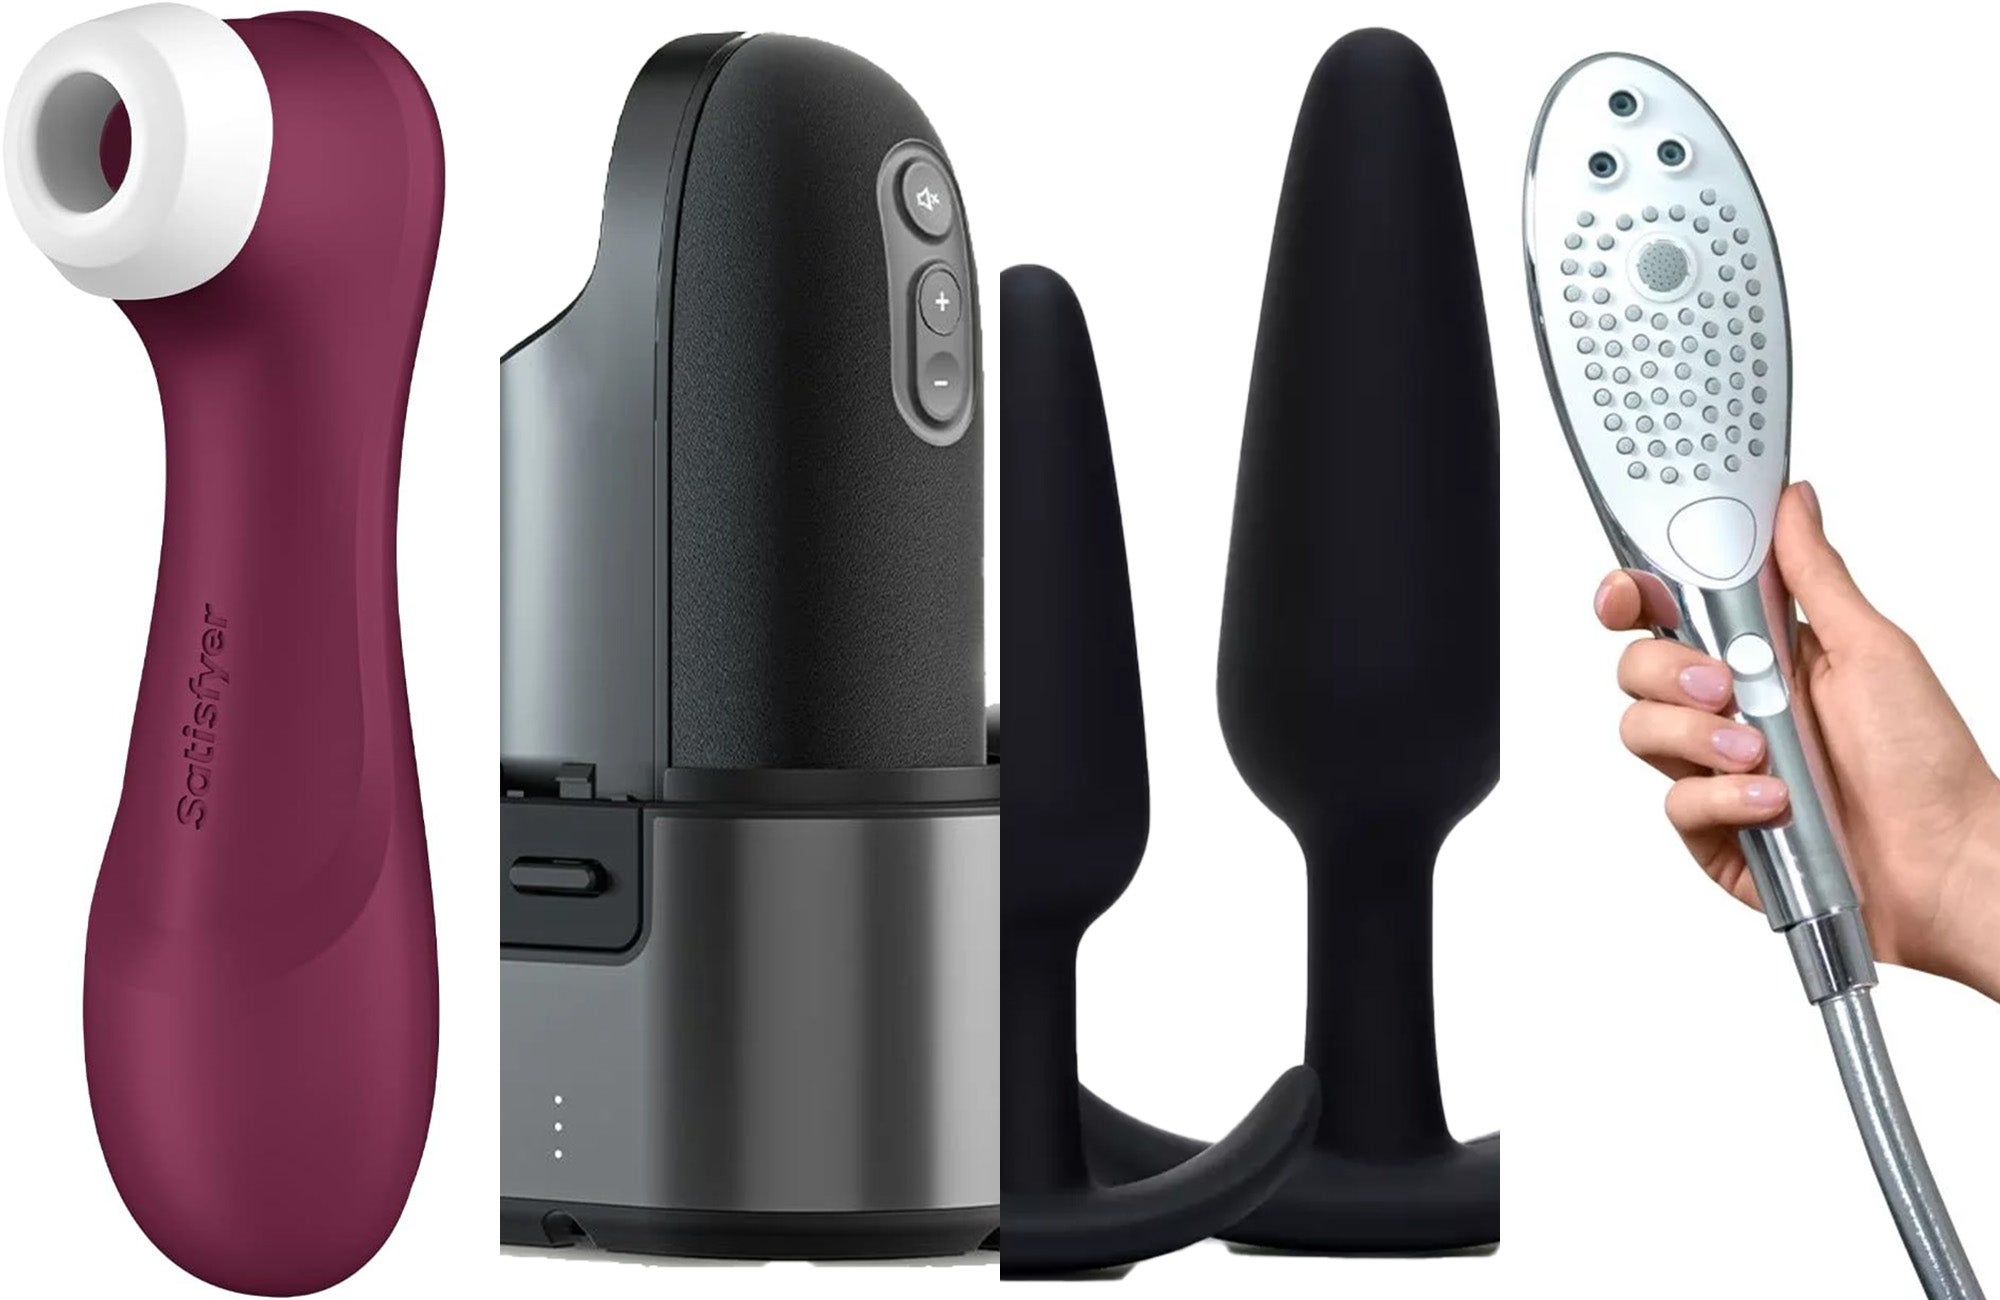 Are Men Getting More Comfortable with Sex Toys in the Bedroom?